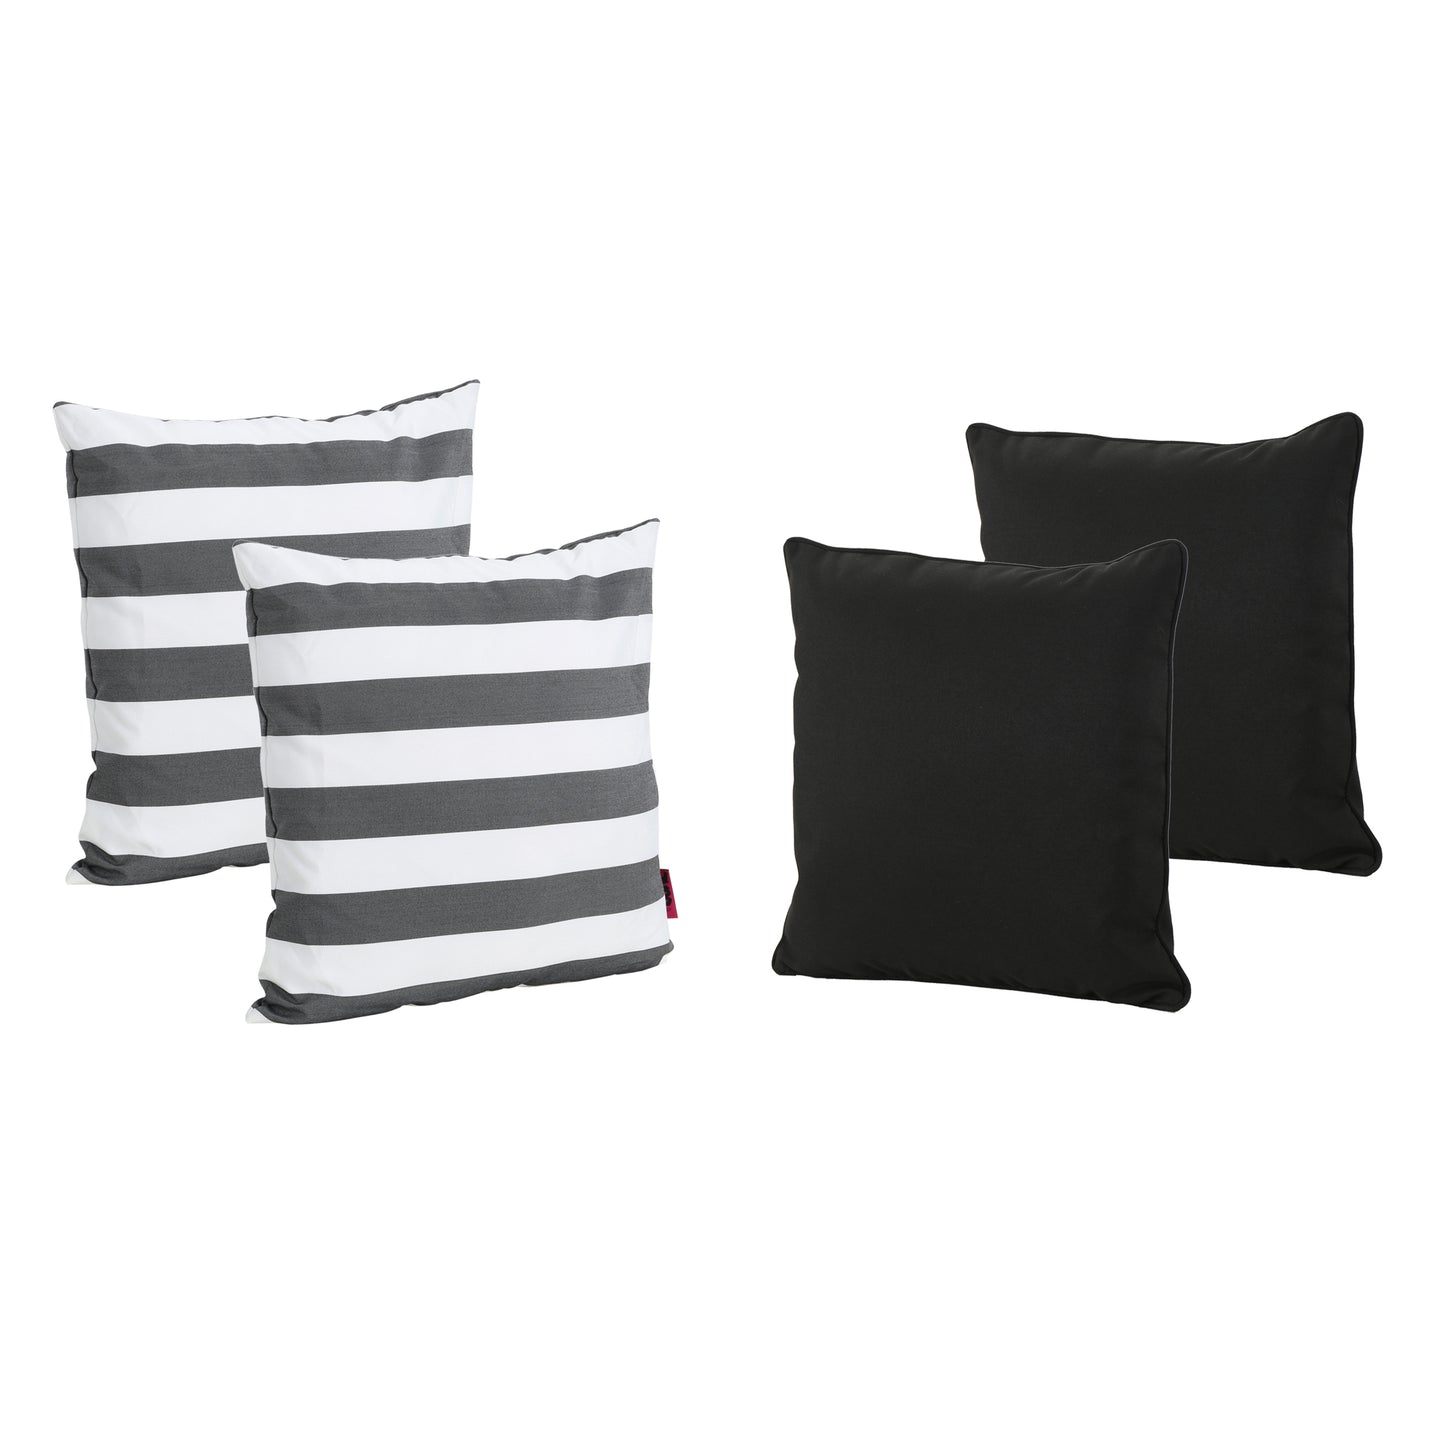 La Jolla Outdoor Striped Water Resistant Square Throw Pillows - Set of 4